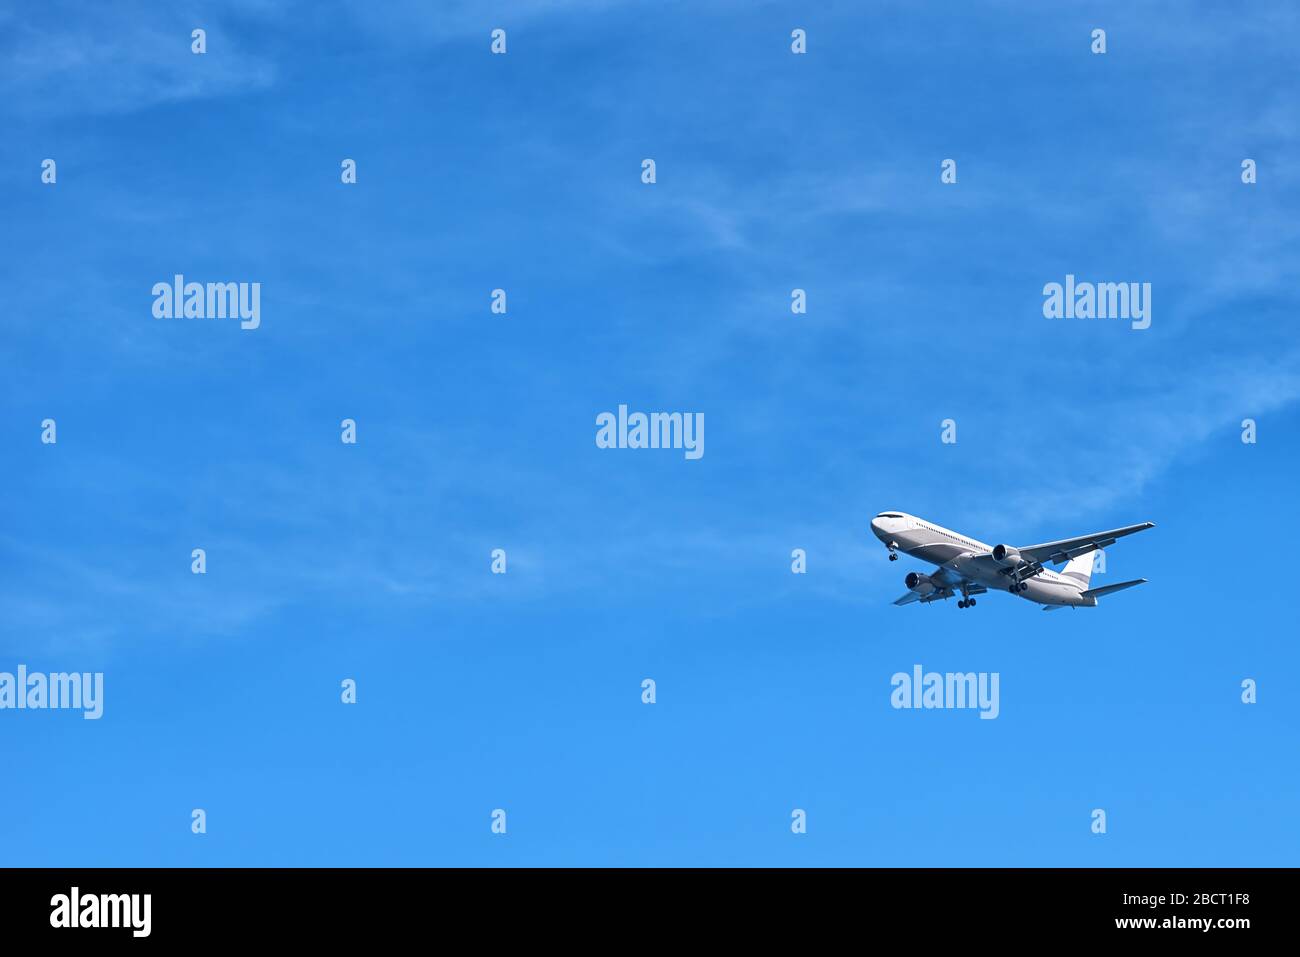 The airplane flying in the sky a close up the bottom view Stock Photo